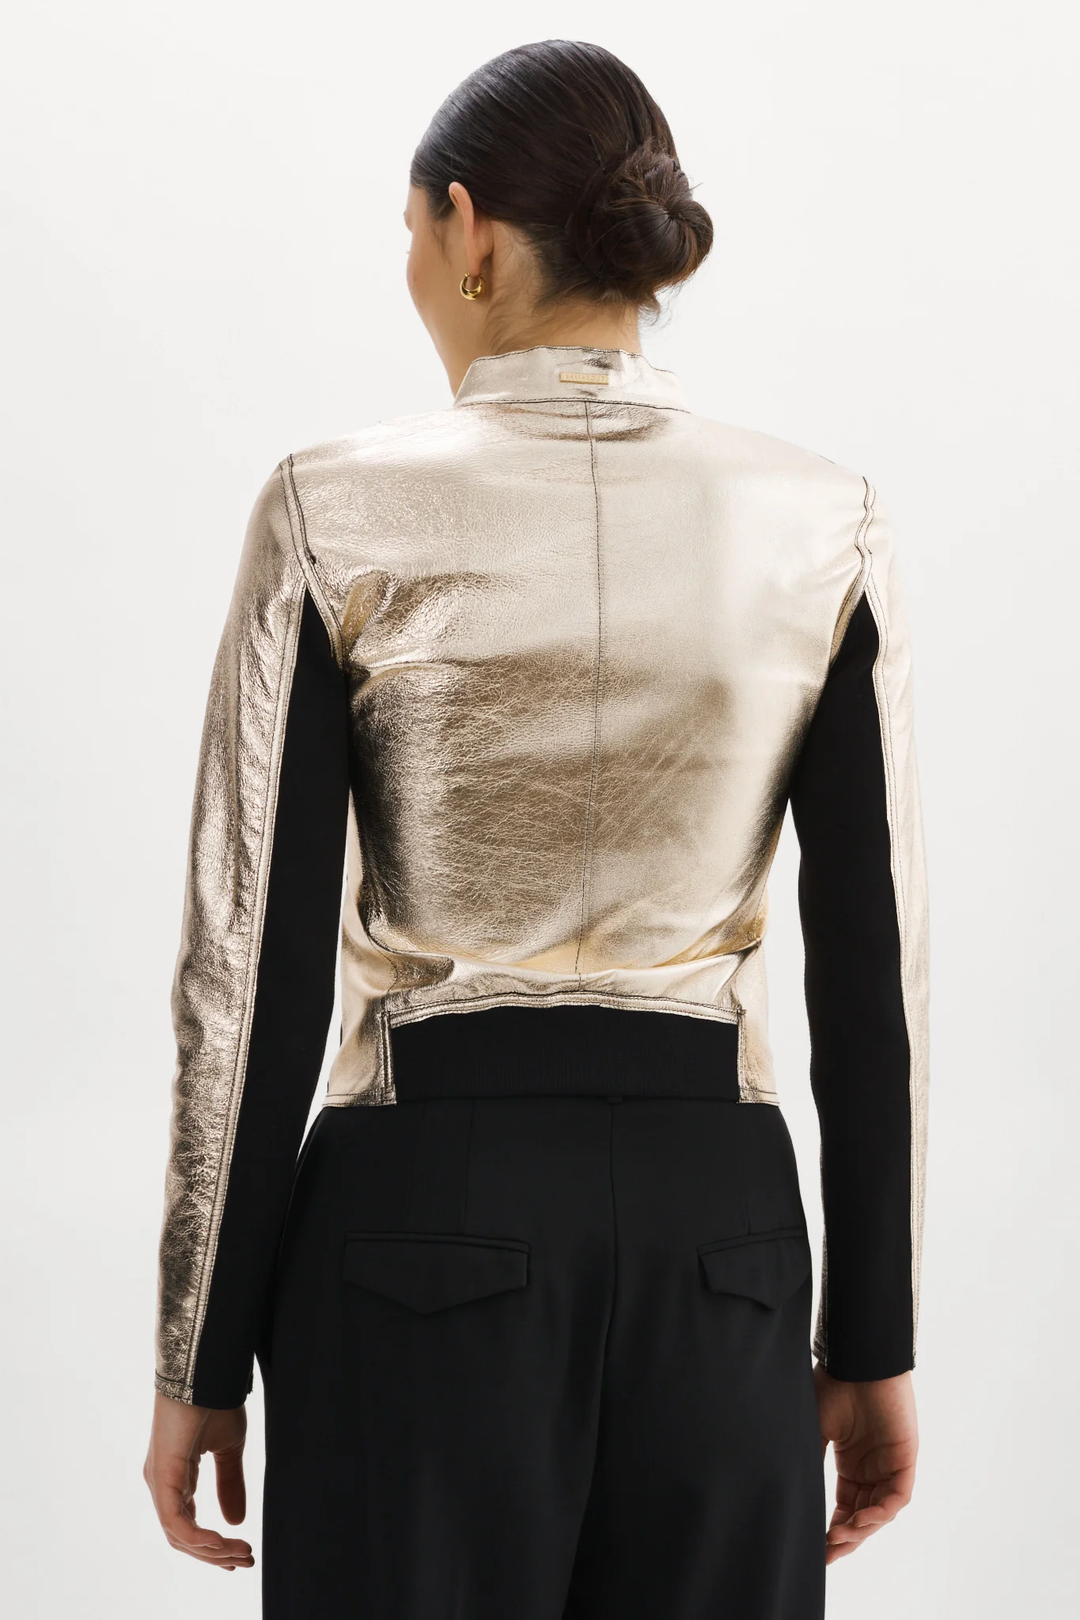 LAMARQUE - Chapin Reversible Leather Bomber in Black/Gold